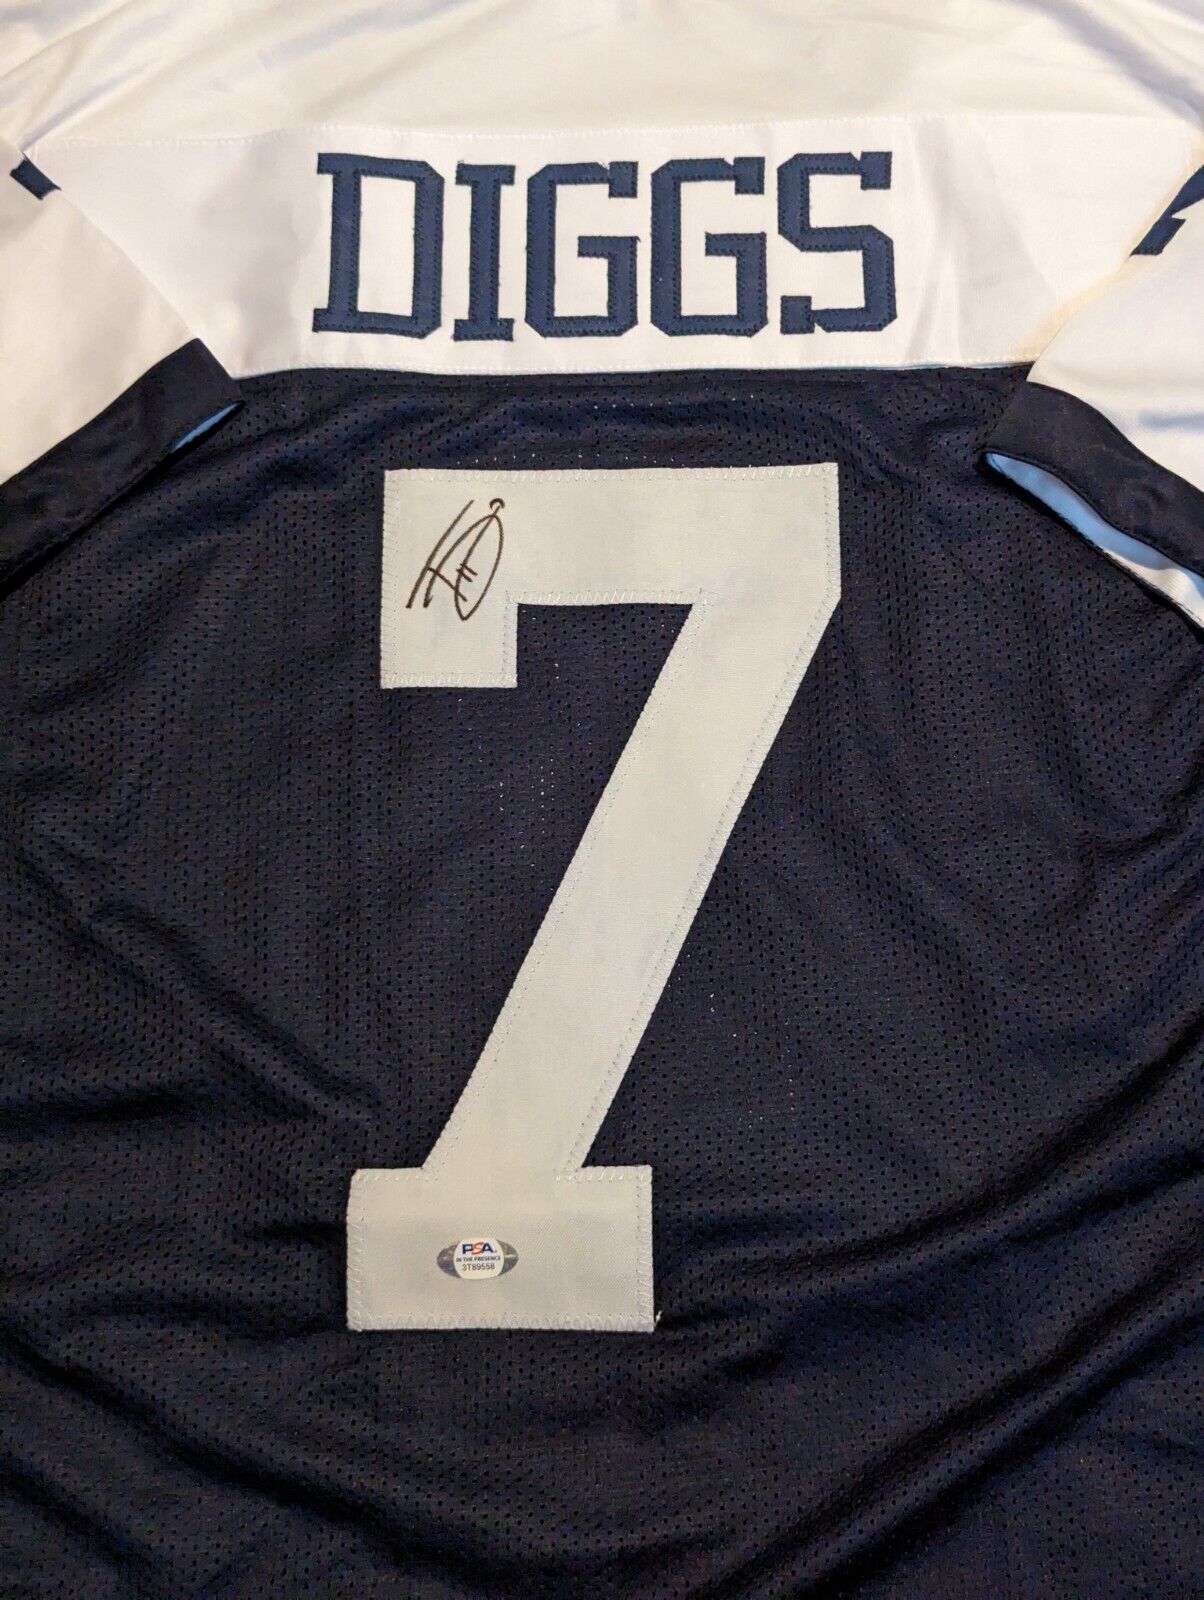 MVP Authentics Dallas Cowboys Trevon Diggs Autographed Signed Jersey Psa Holo 72 sports jersey framing , jersey framing